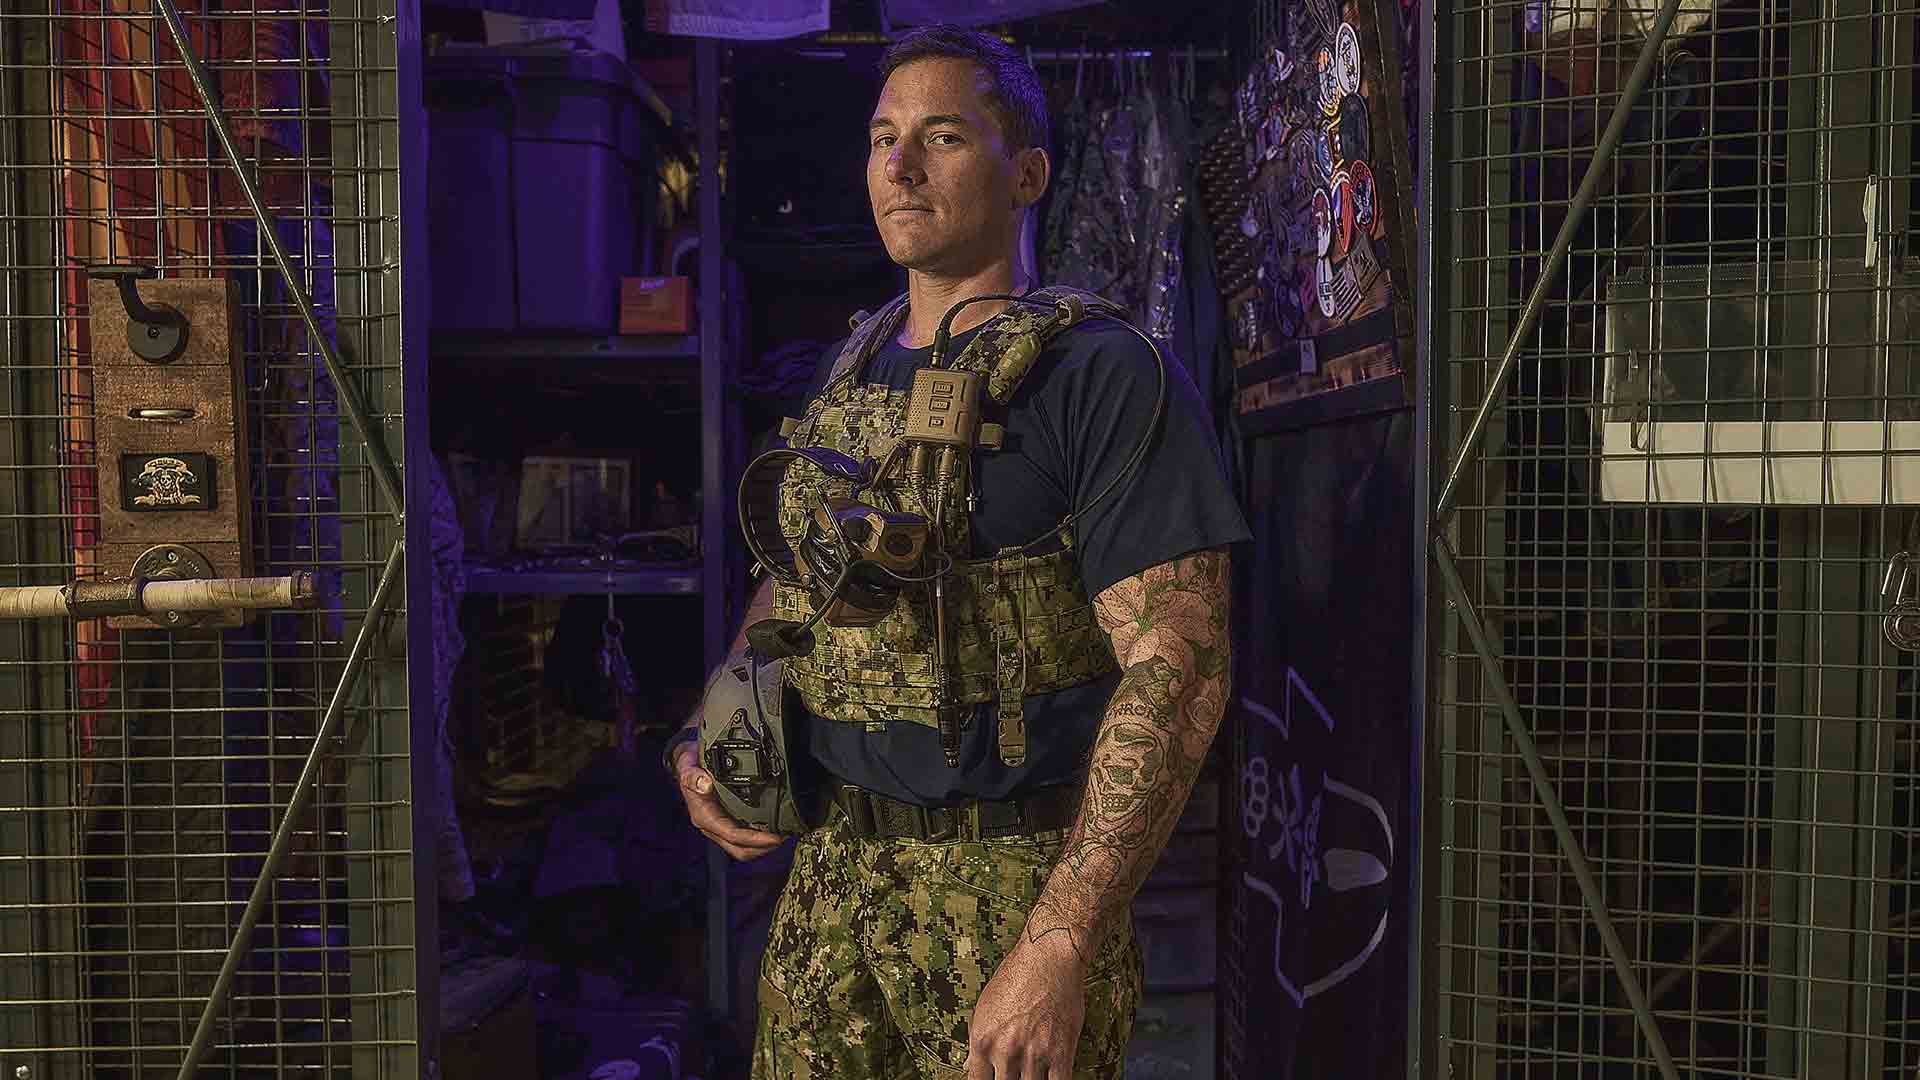 US Navy SWCC sailor SB1 Nick O’Sullivan stands in front of gear locker wearing his Special Warfare Combat Crewman gear.